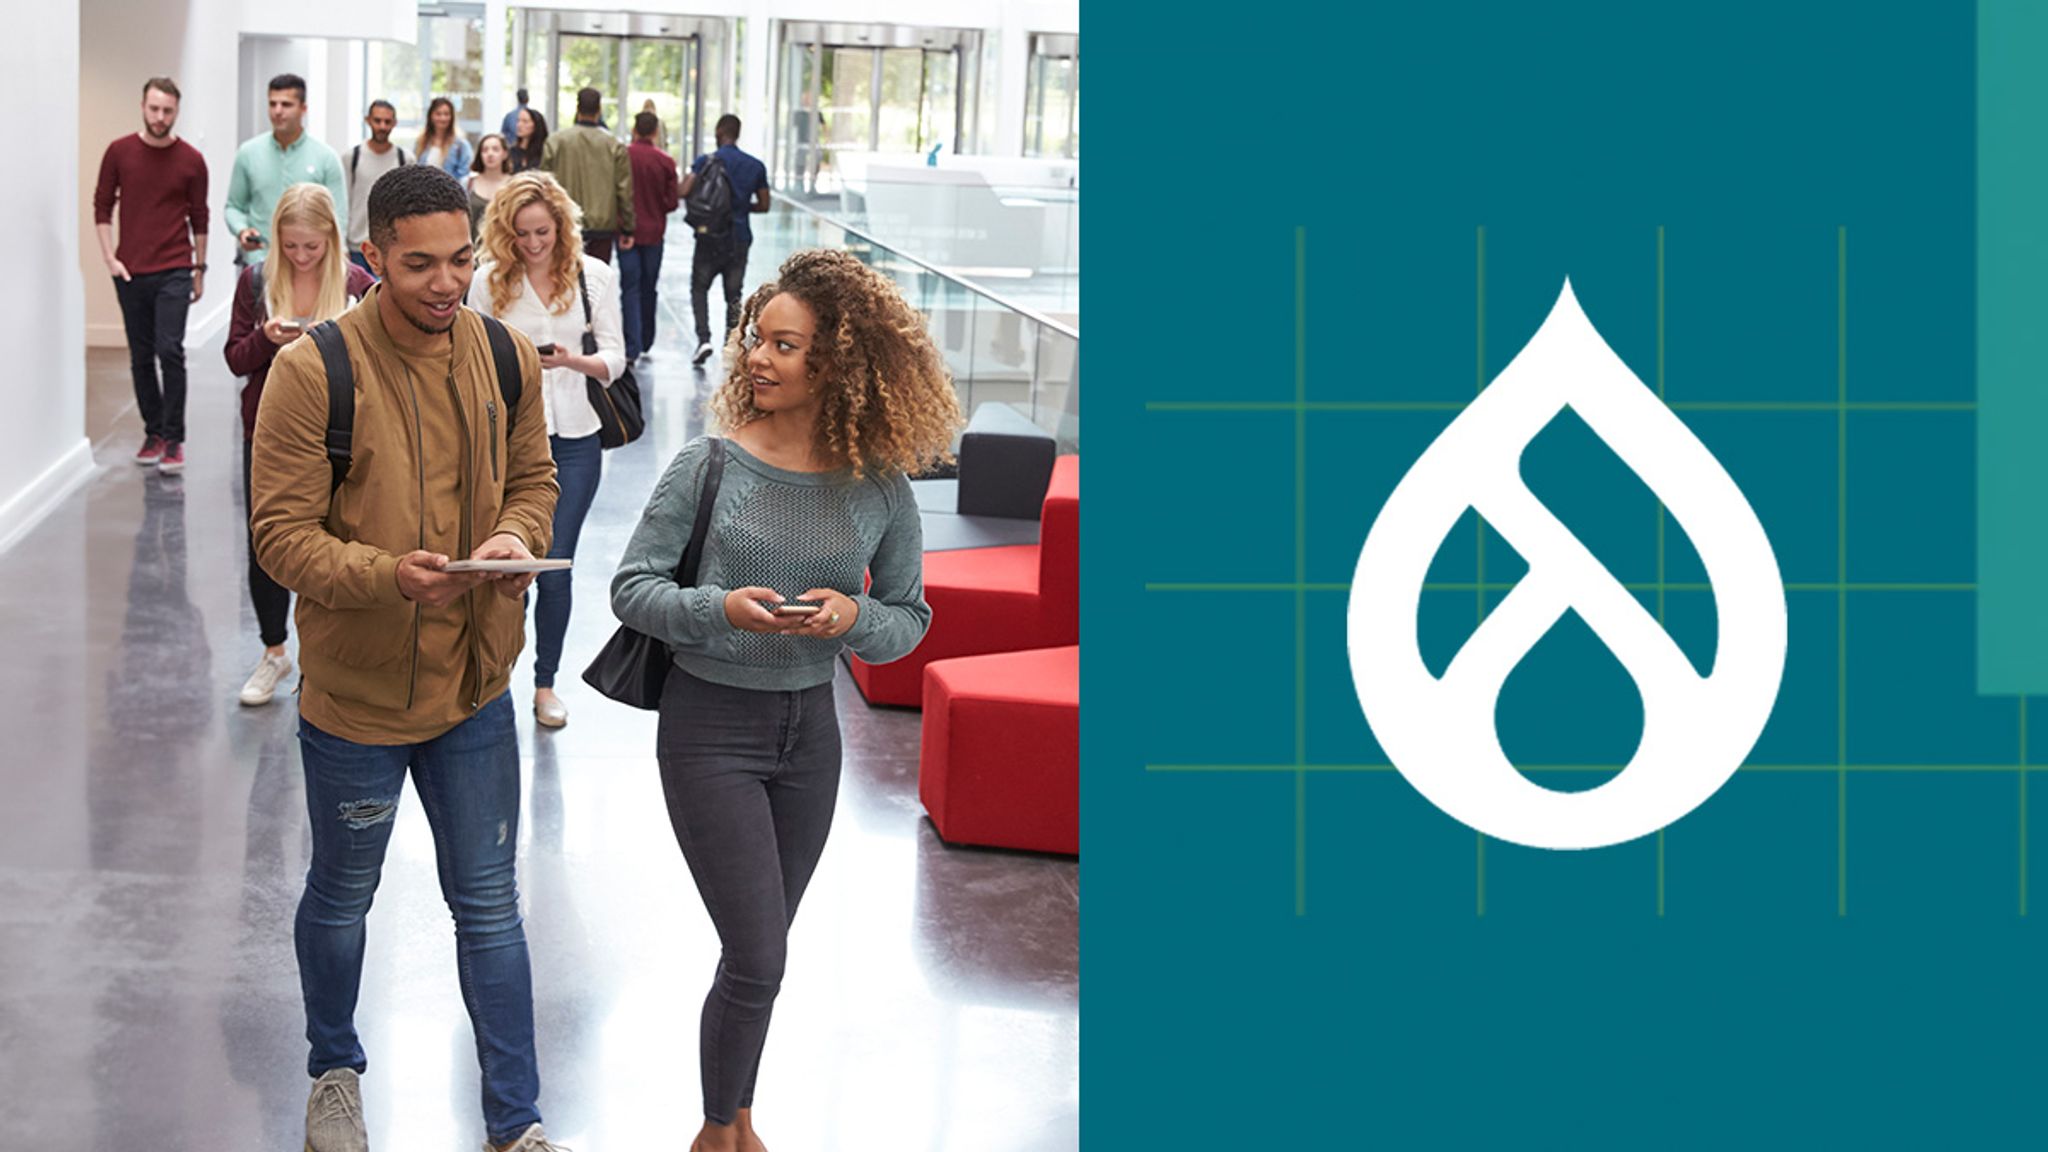 College students in a building walking together with the Drupal logo to the right side.